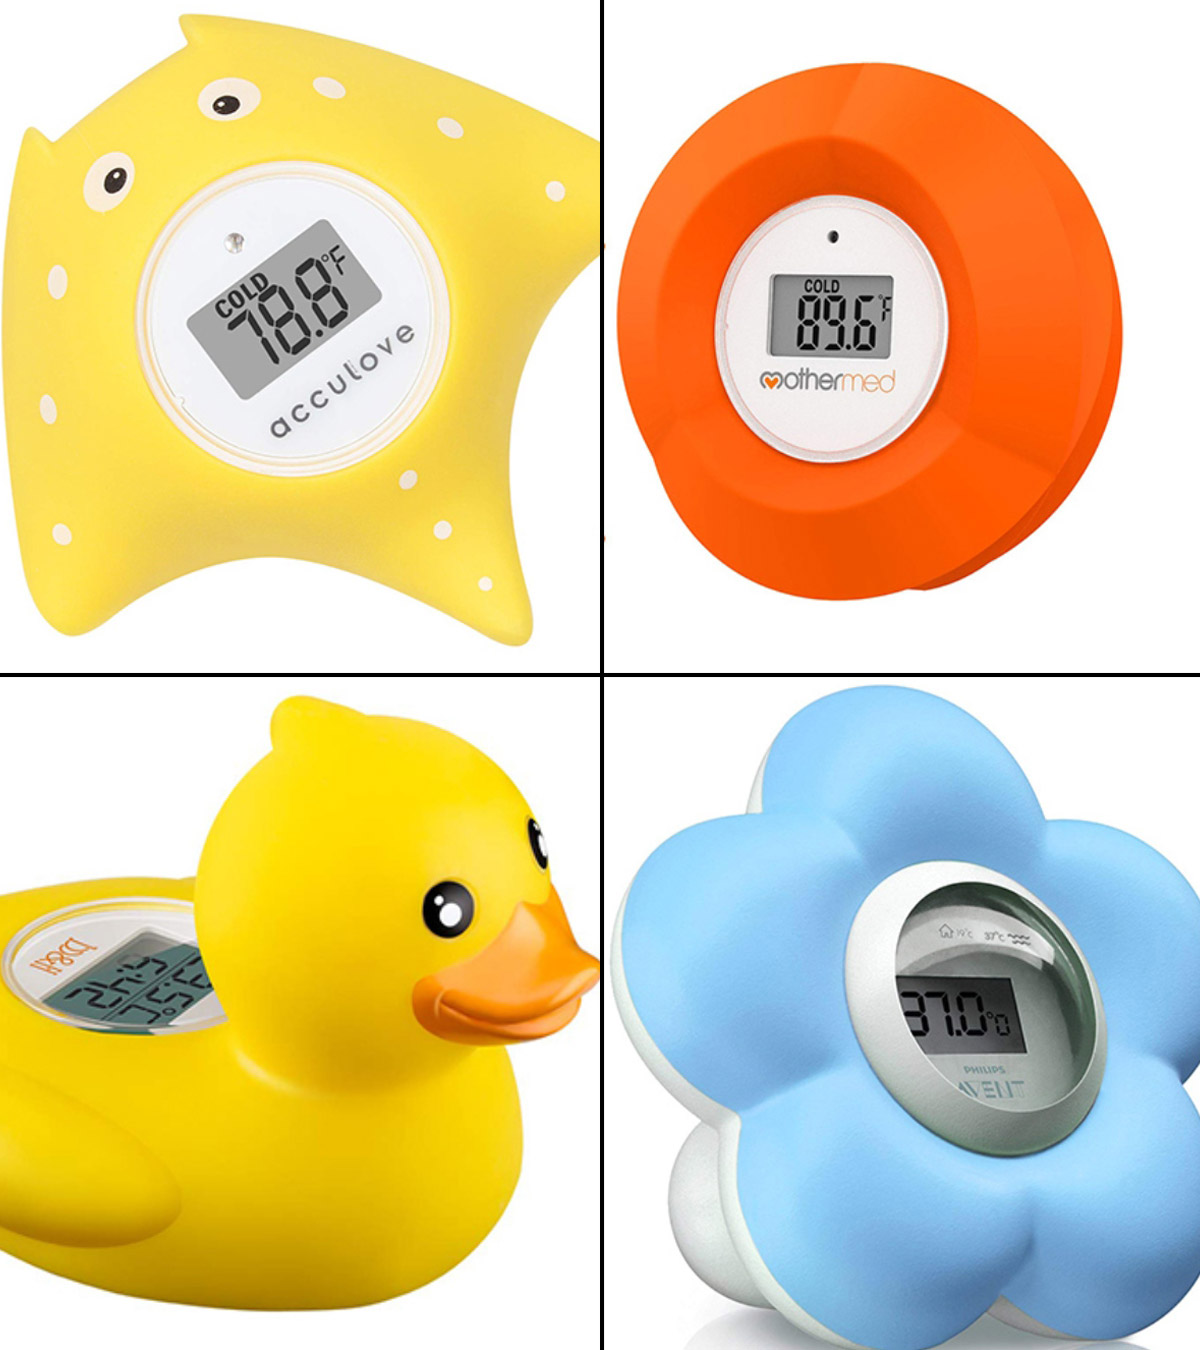 FIRST STEPS STAR YELLOW DUCK BATH THERMOMETER SAFETY BATH BRAND NEW 